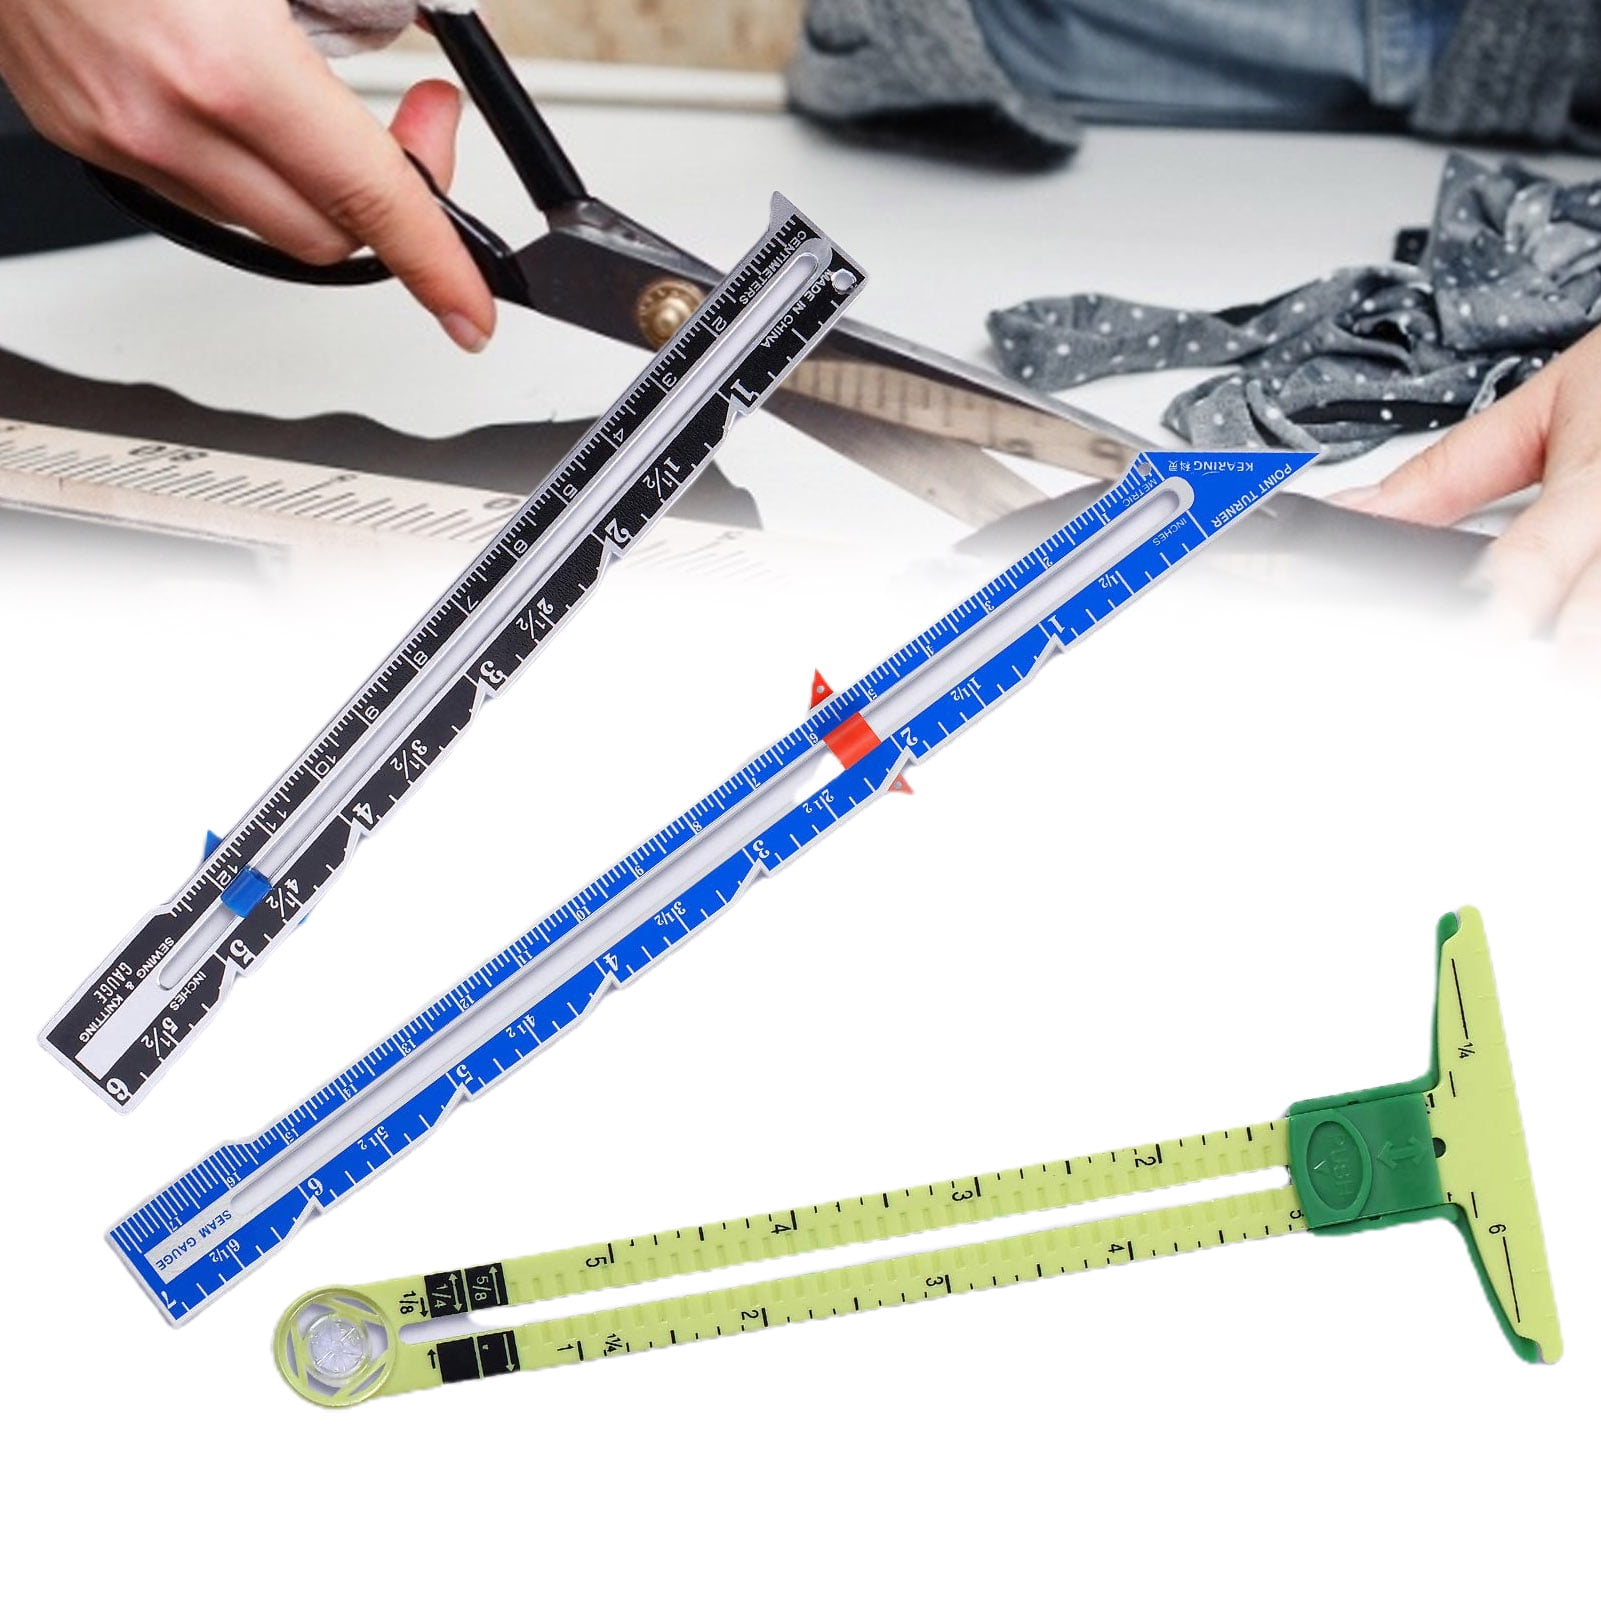 Sewing Rulers And Guides For Fabric Sewing Gauge Sewing Measuring Tool  5-in-1 Sliding Gauge Fabric Quilting Ruler For Knitting